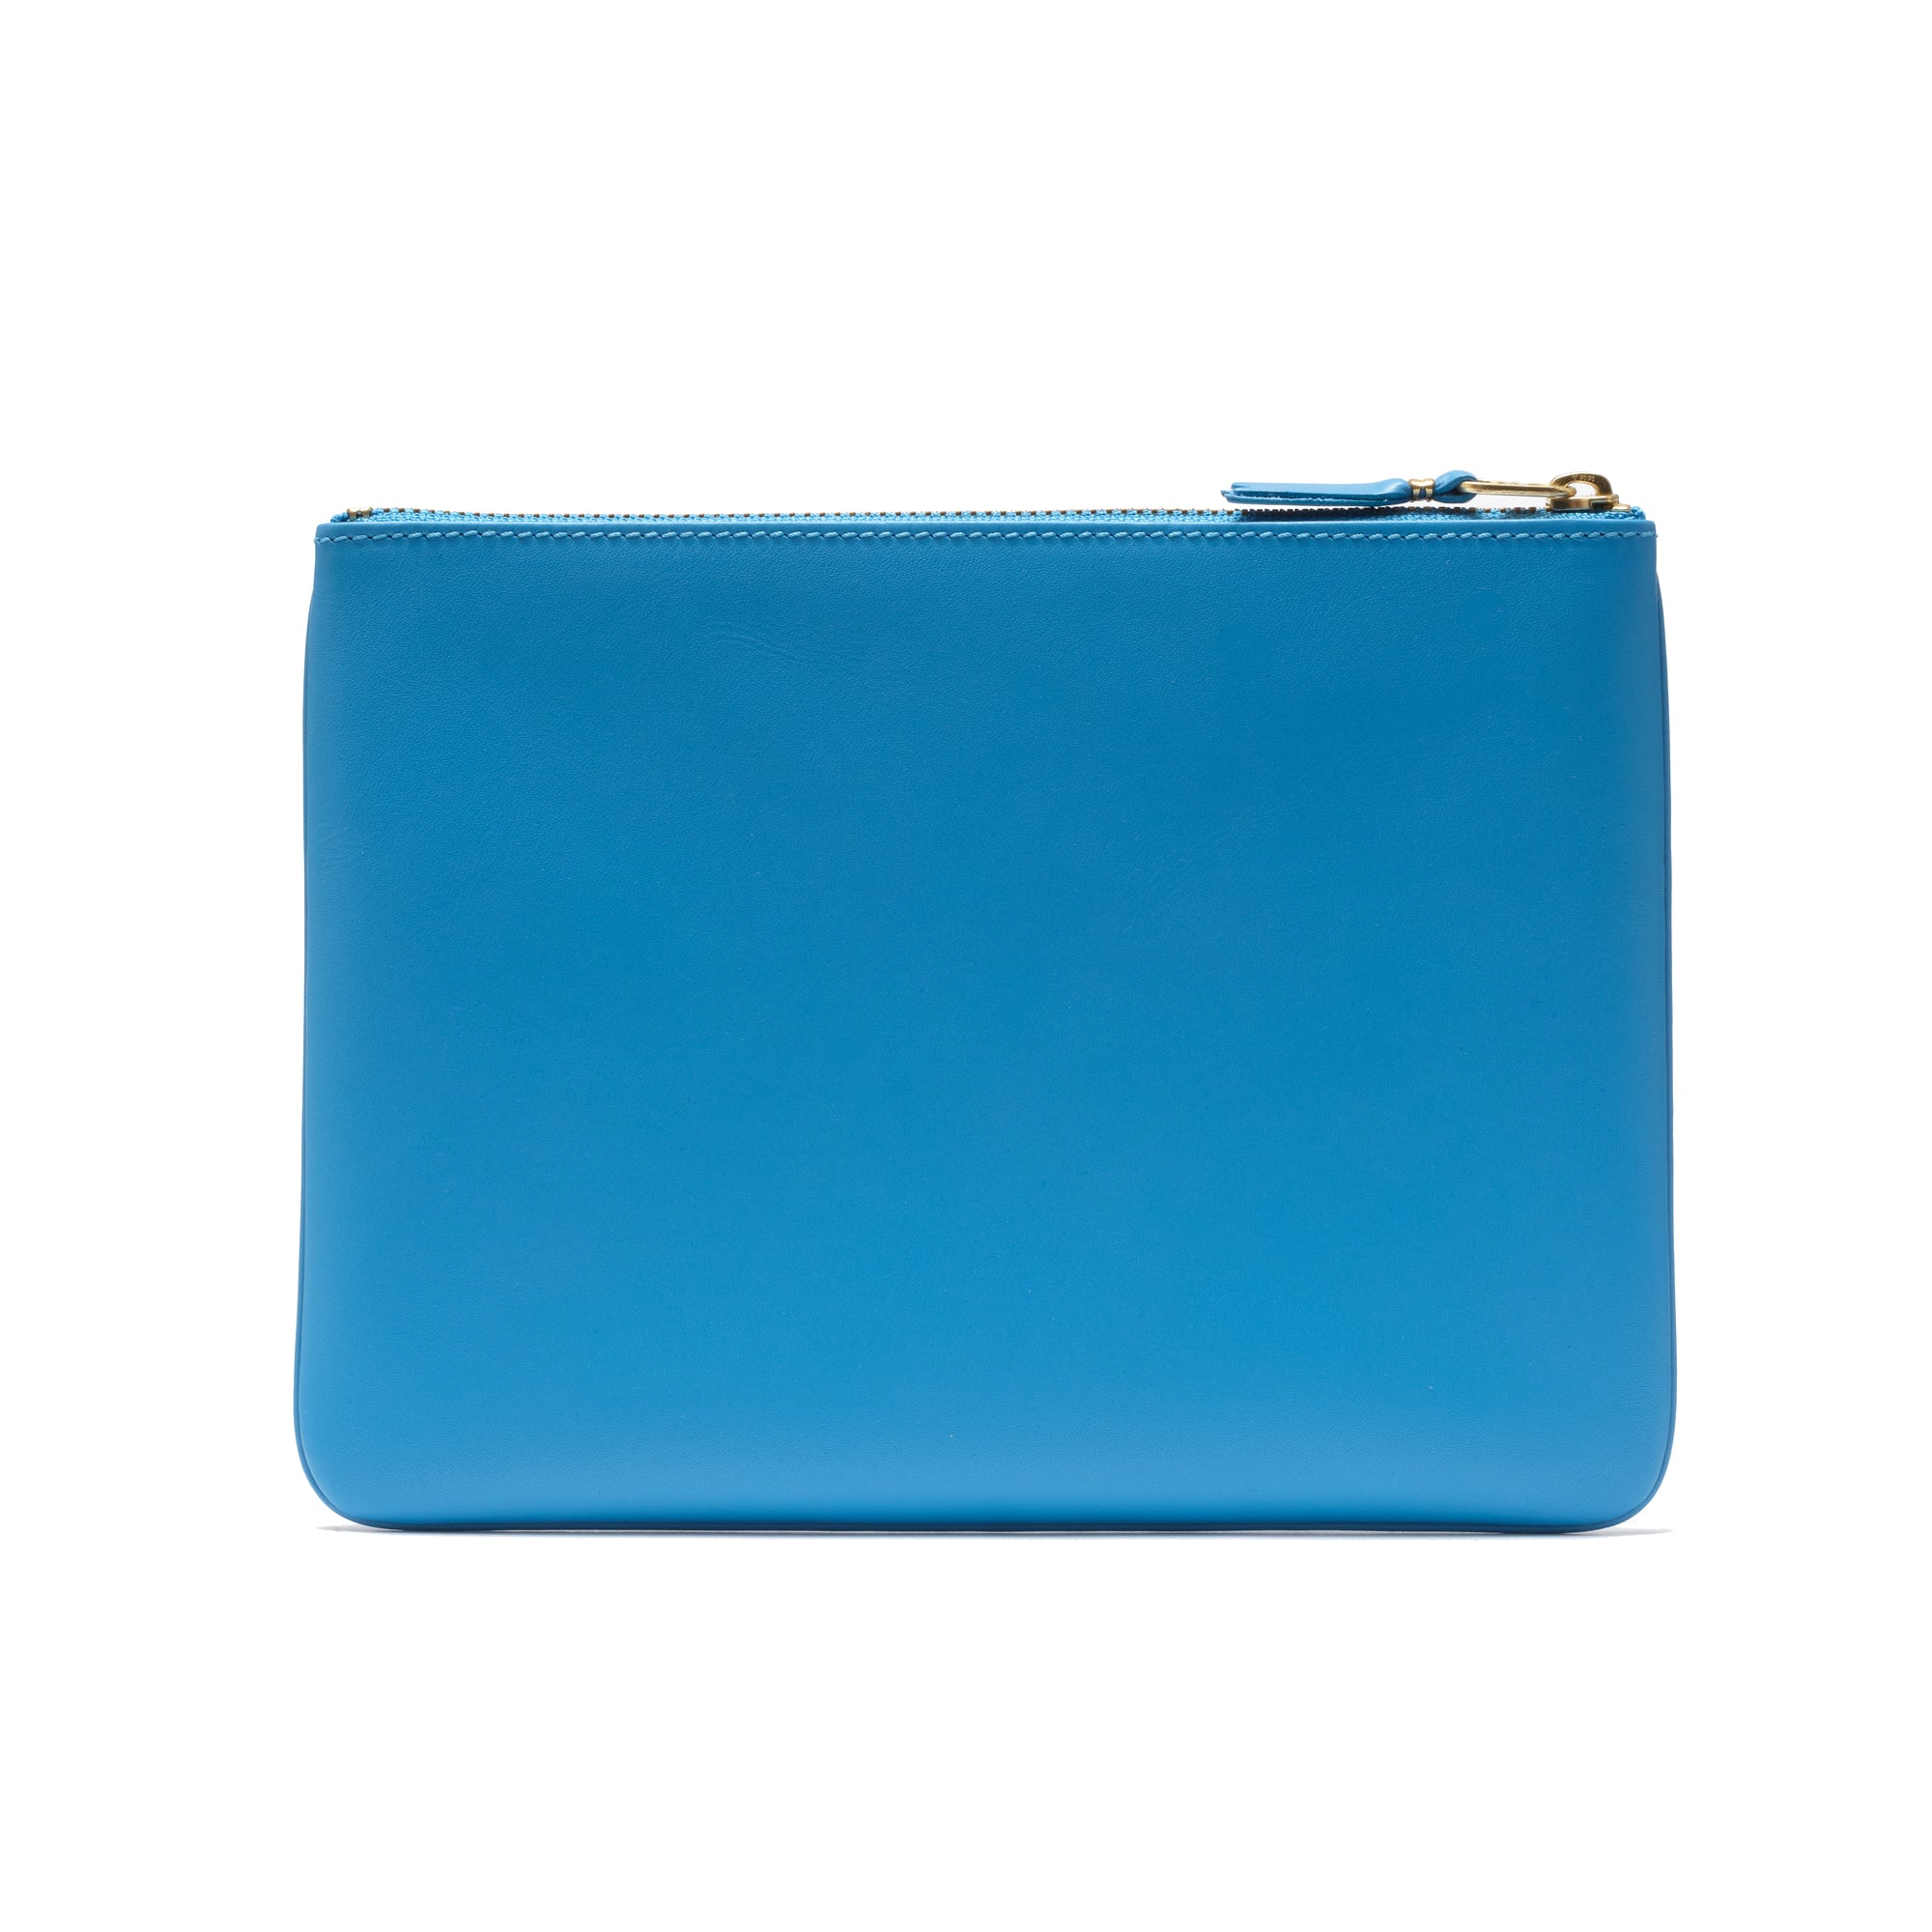 CDG WALLET - Colored Leather Line-A051 - (Blue) view 2